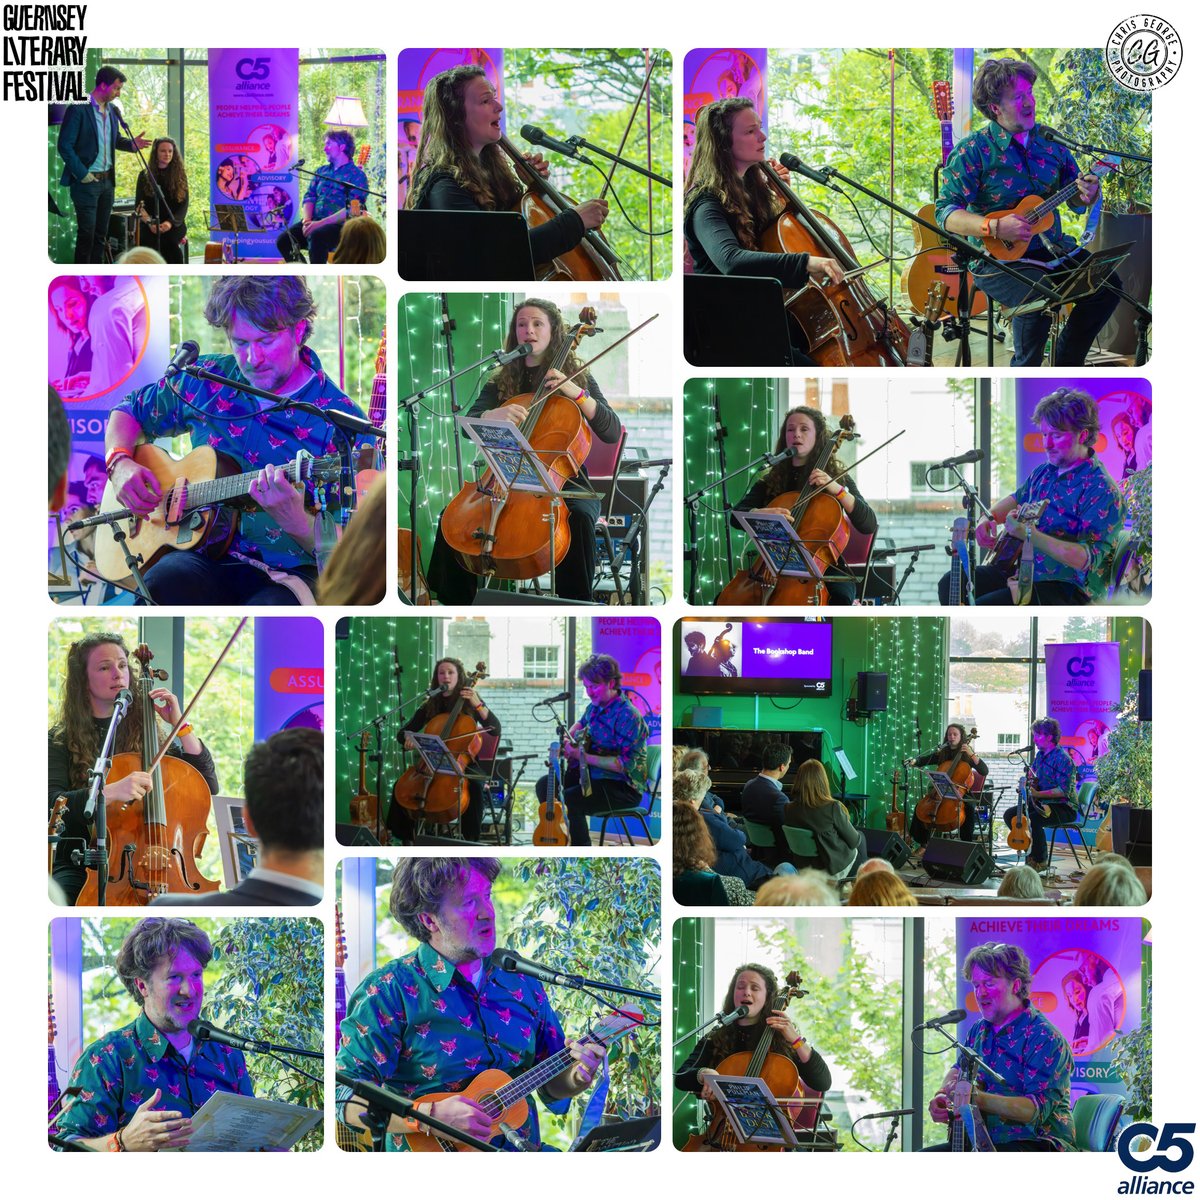 Saturday evening @GuernseyLitFest goers were treated to a magical free concert of songs inspired by books with the @TheBookshopBand The event included a world premiere of their new song inspired by Victor Hugo’s Toilers of the Sea and was kindly sponsored by @C5Alliance